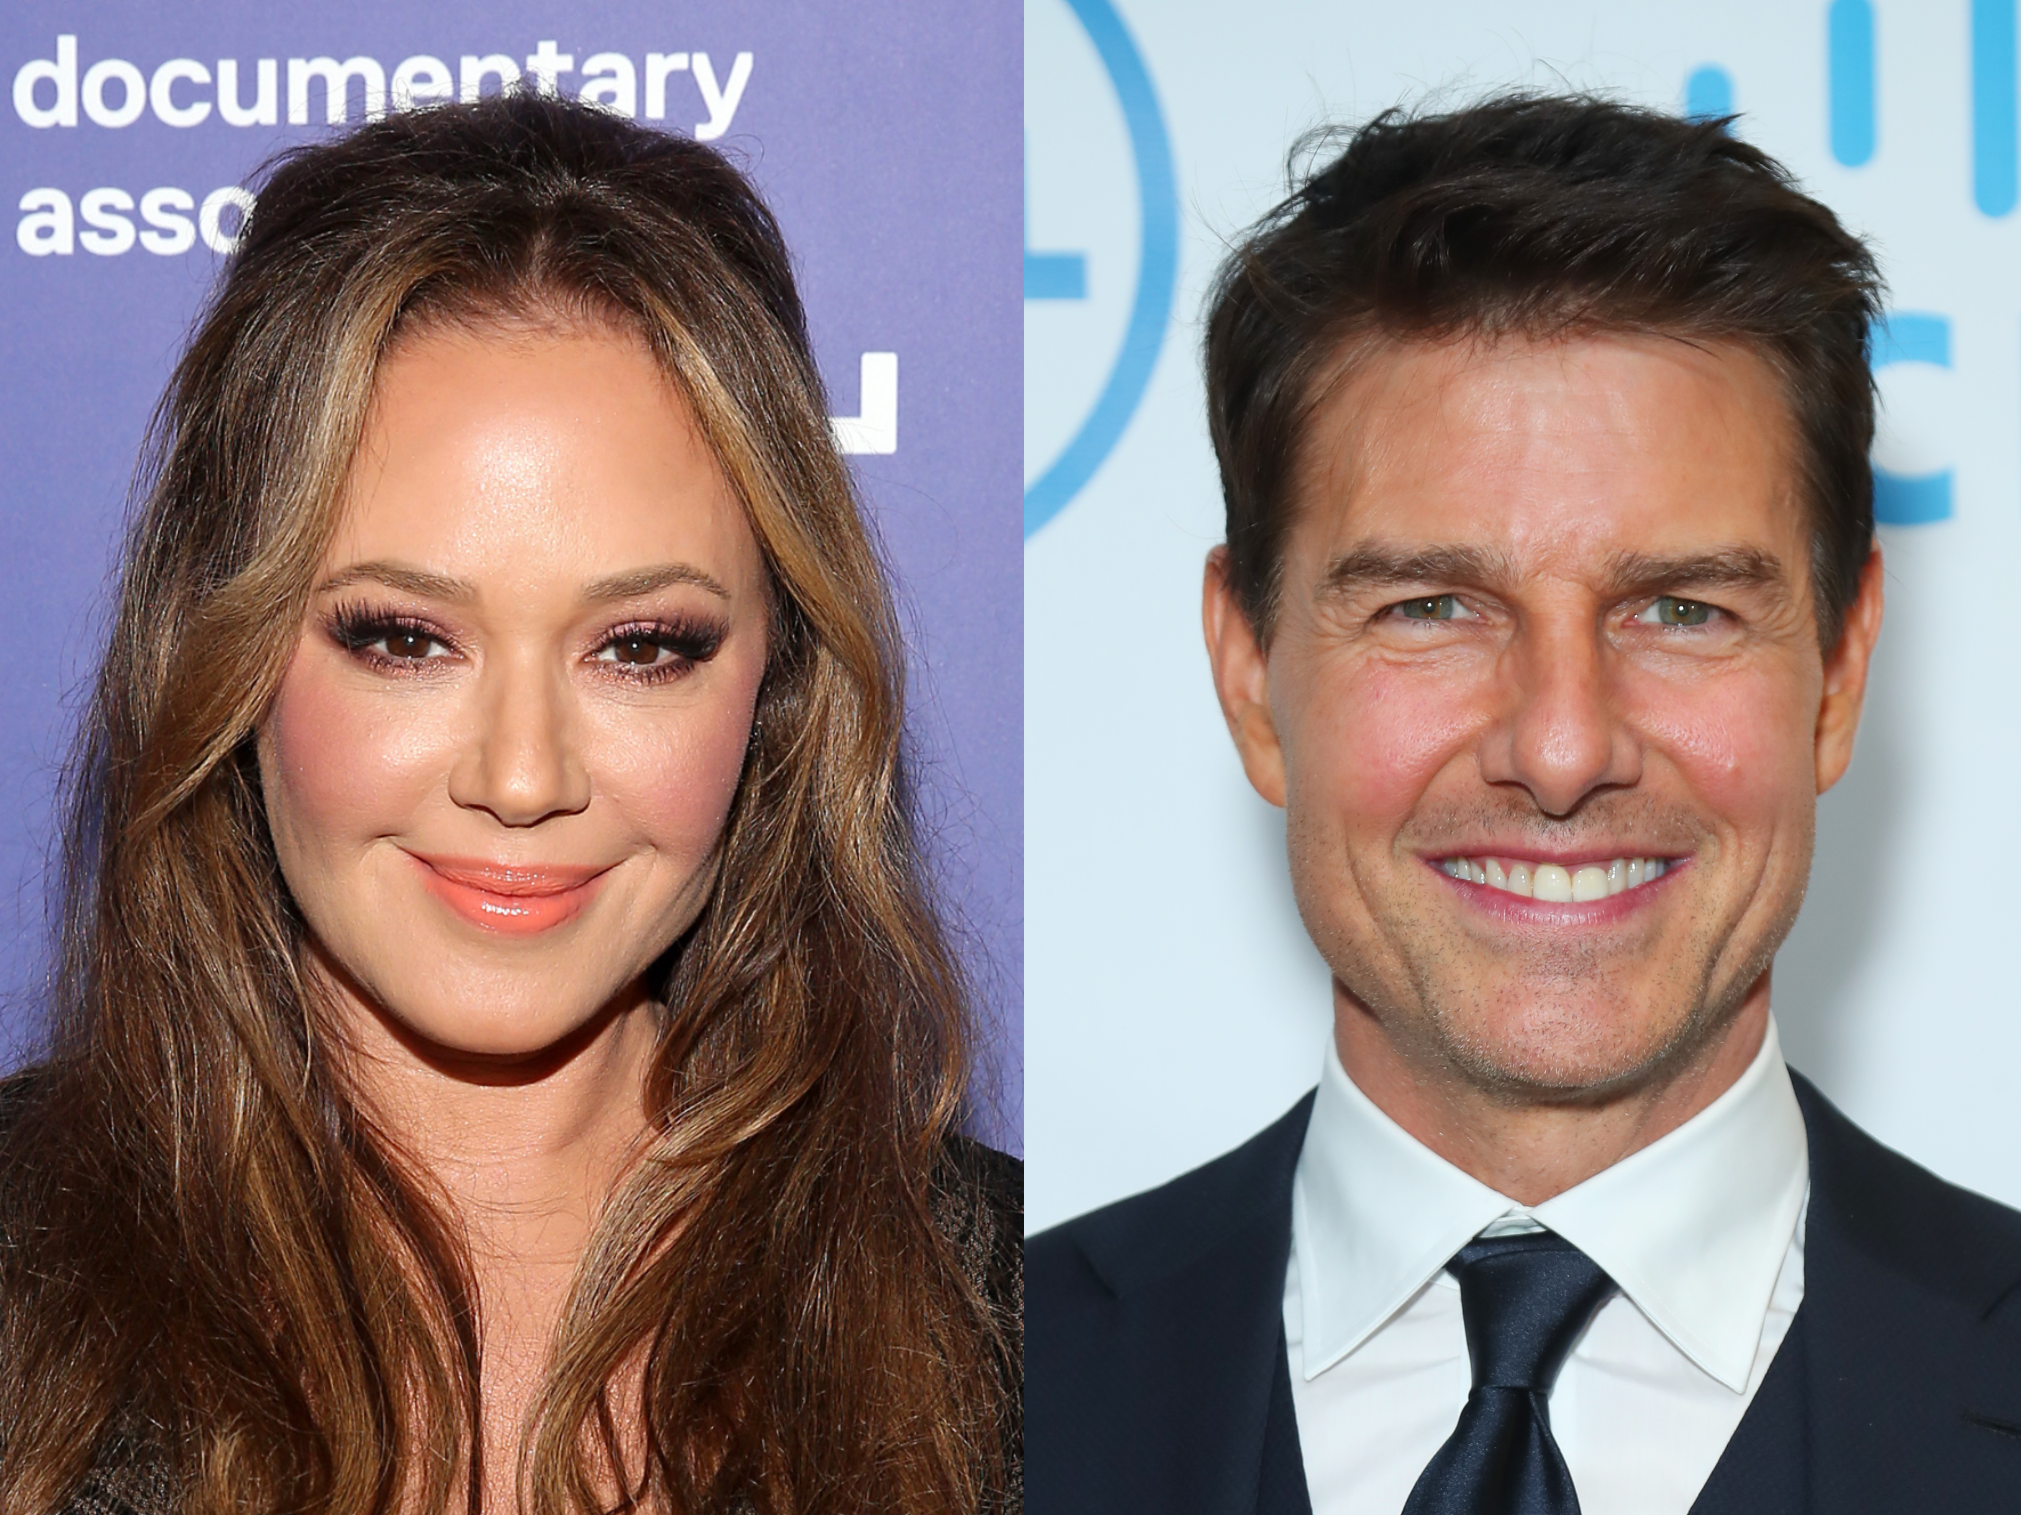 Tom Cruises nice guy image not consistent with his actions, says actor and former Scientologist Leah Remini The Independent The Independent